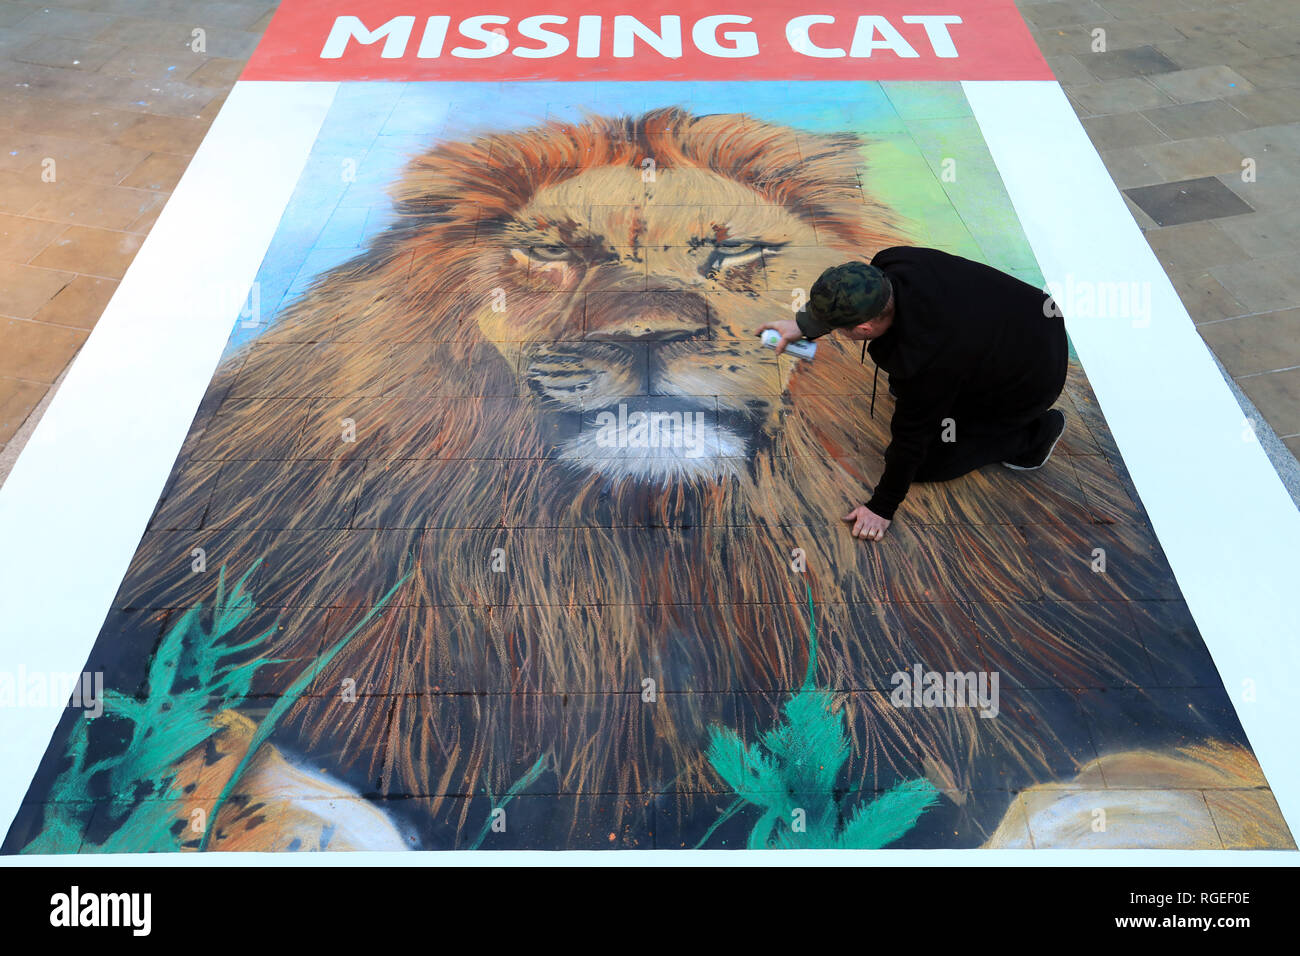 London, UK. 29th January, 2019. NOW YOU SEE ME, NOW YOU DON’T  Giant missing cat poster is a stark reminder that big cats are disappearing before our very eyes  •	The emotive artwork was commissioned by National Geographic to raise awareness of its Big Cats Initiative which works to halt the global decline of big cats in the wild  •	The disappearing poster was designed by street artist, Dean Zeus Colman, as a poignant reminder of the role humans play in the demise of big cats  •	Lions have now disappeared from 90% of their historic range1    Credit: Oliver Dixon/Alamy Live News Stock Photo